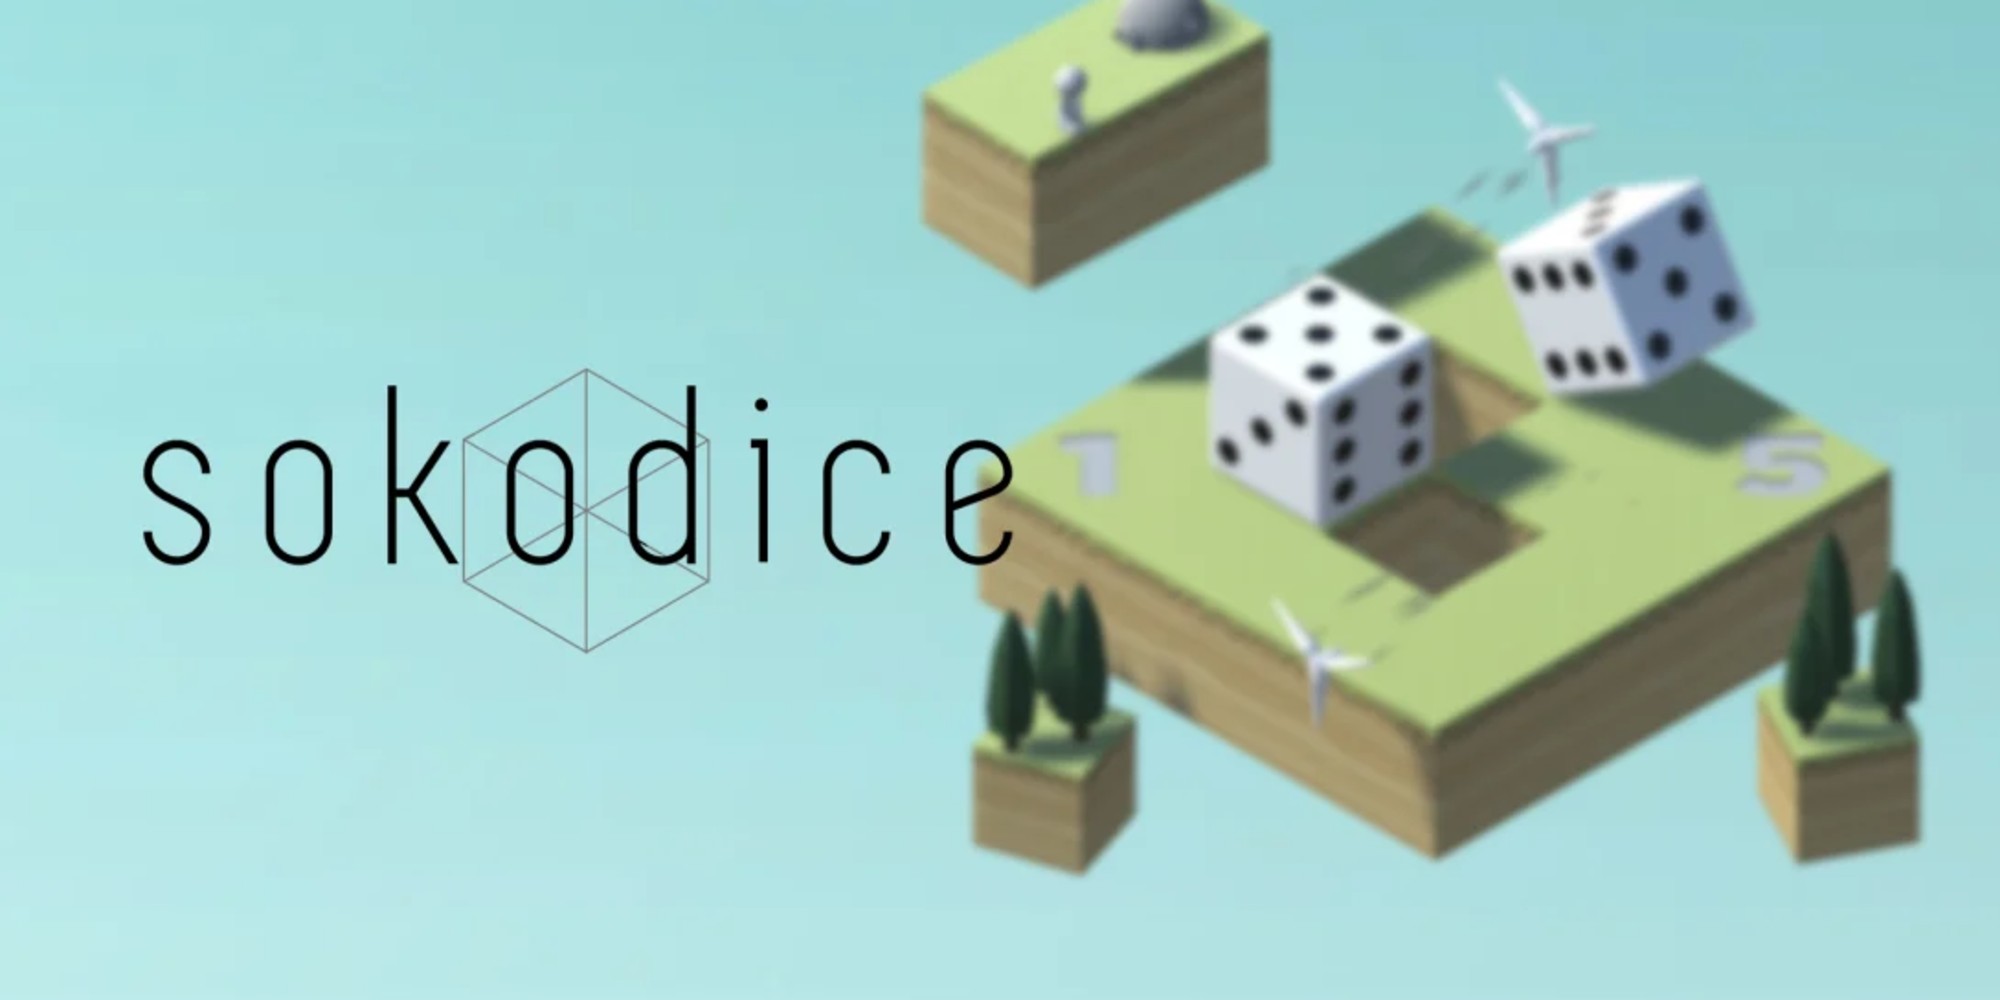 Sokodice switch review